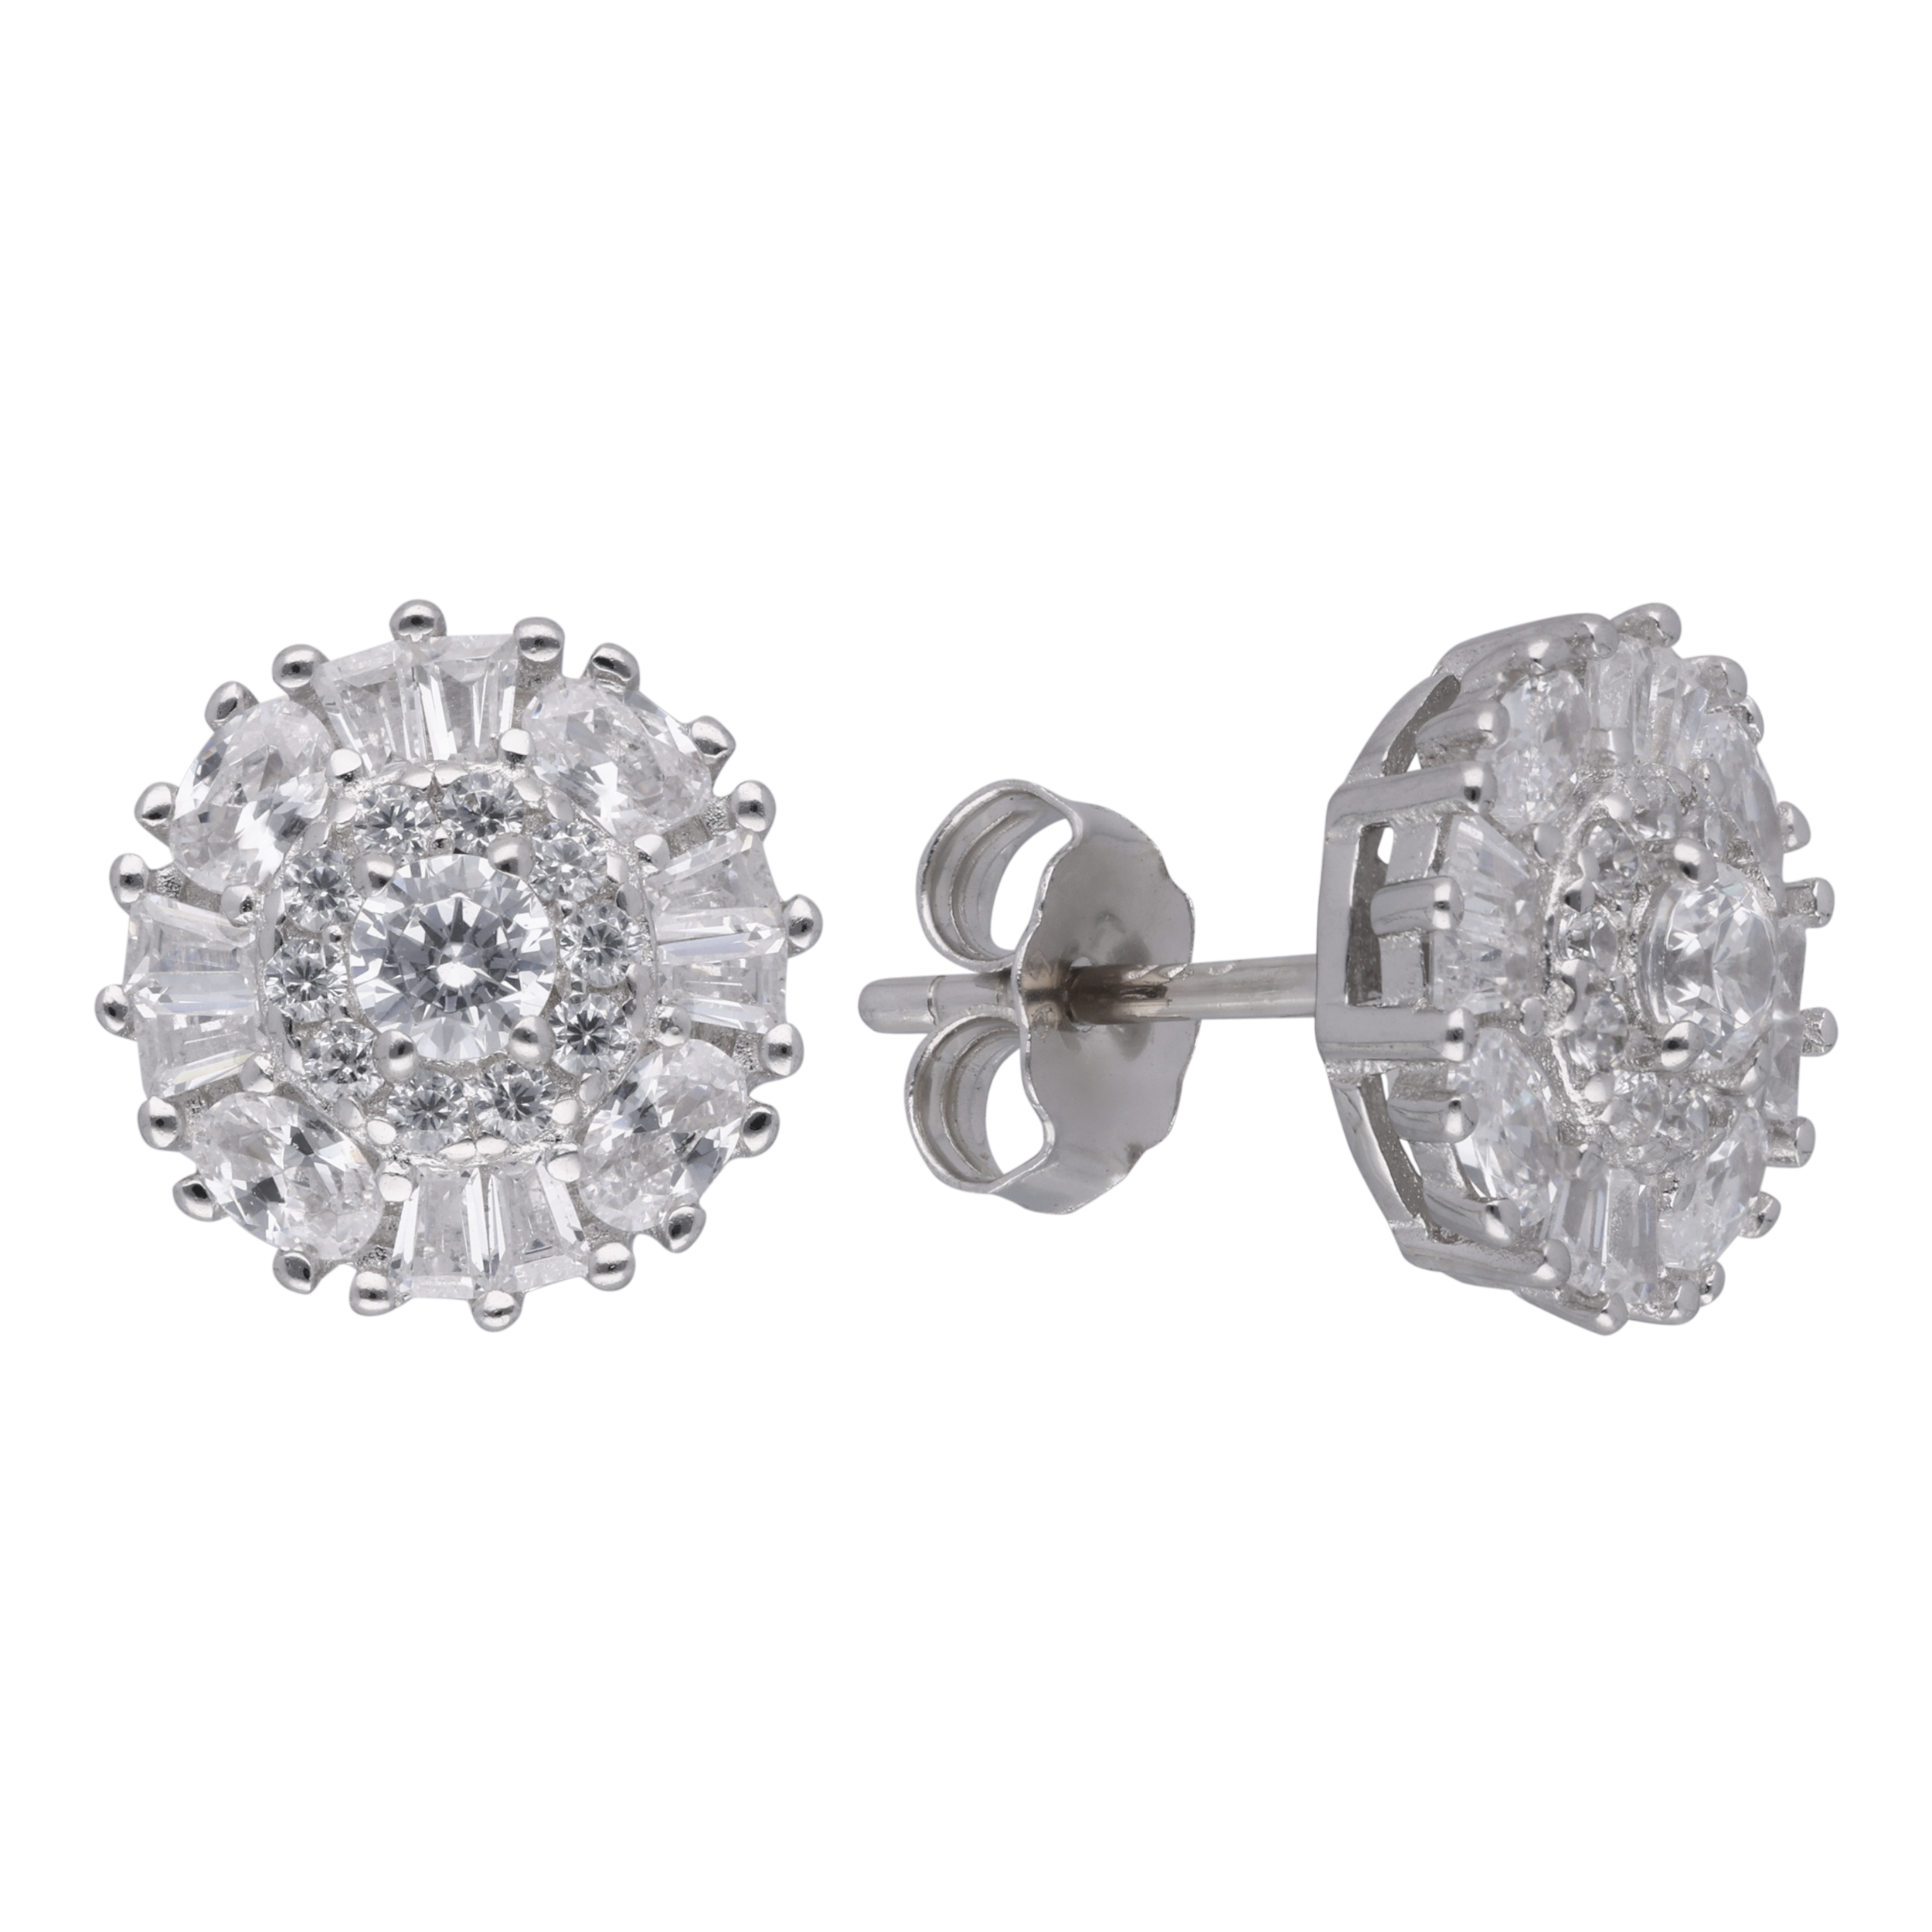 Ethereal Brilliance: Sterling Silver Stud Earrings with Sparkling Cubic Zirconias | SKU : 0019892092, 0019892115, 0019892085